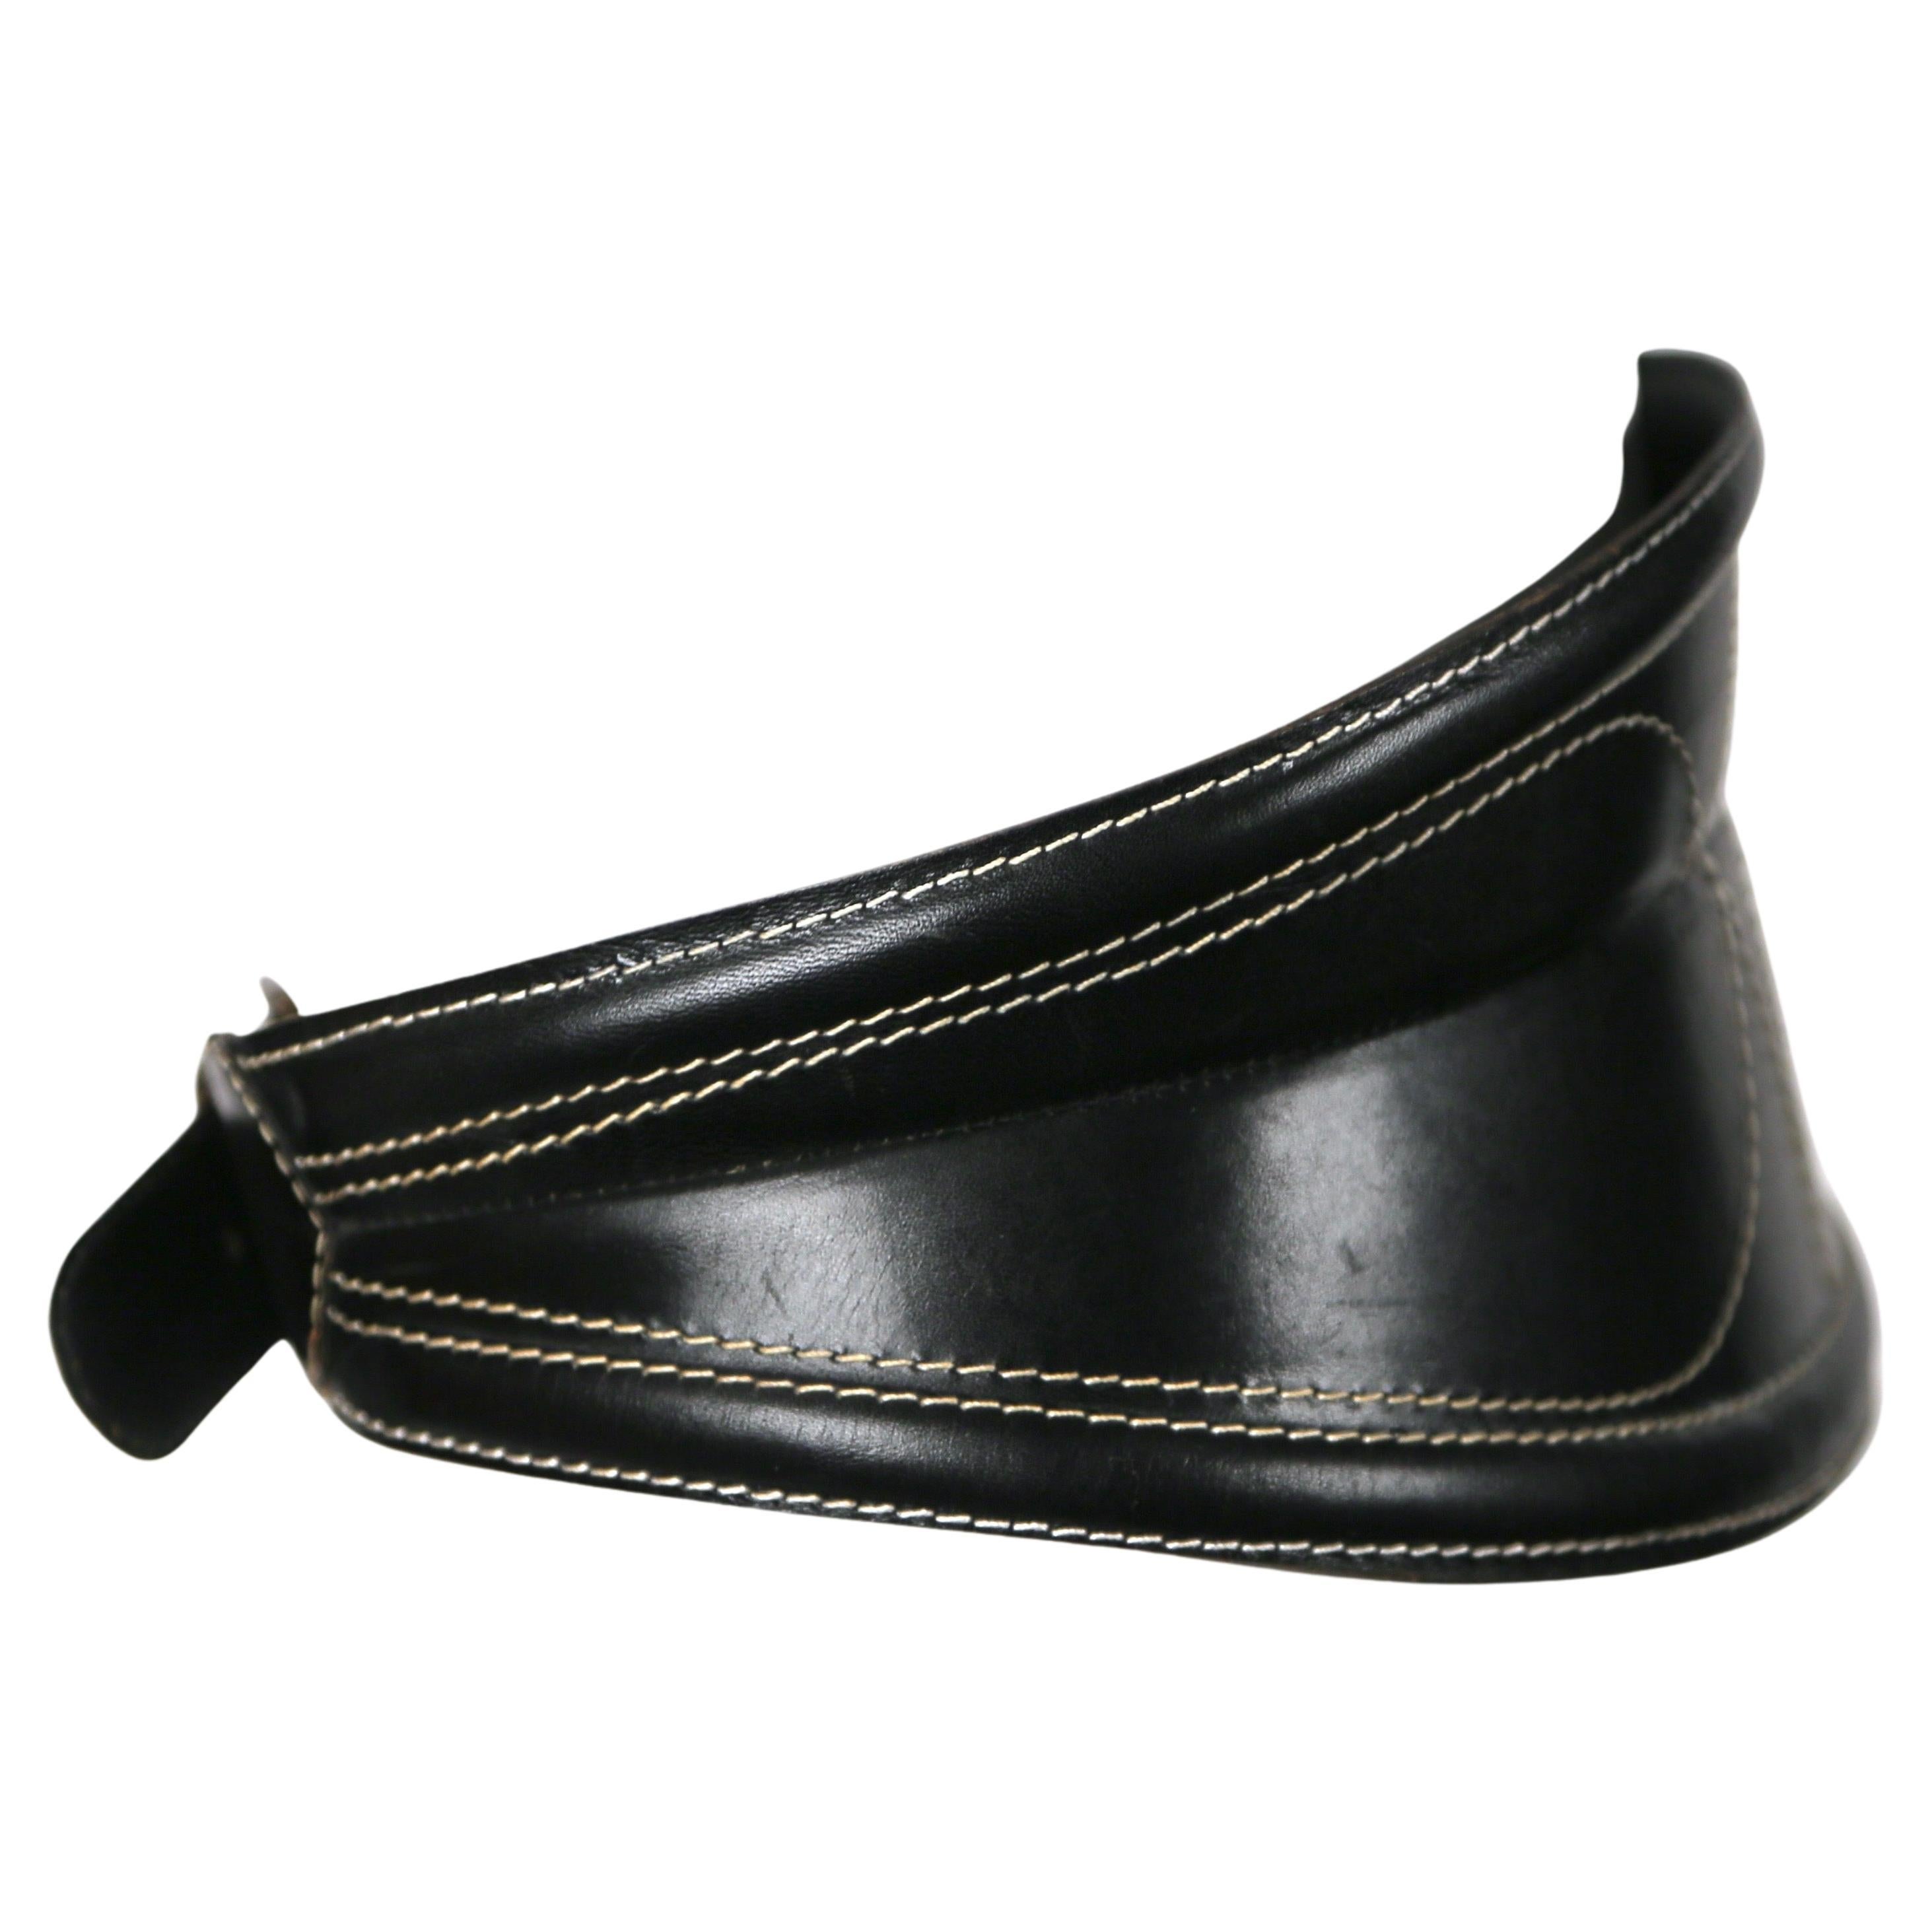 Black leather belt with top-stitching designed by Gianfranco Ferre dating to the early 1980's exactly as seen on Brooke Shields. French size 40. Belt measures approximately: 5.25